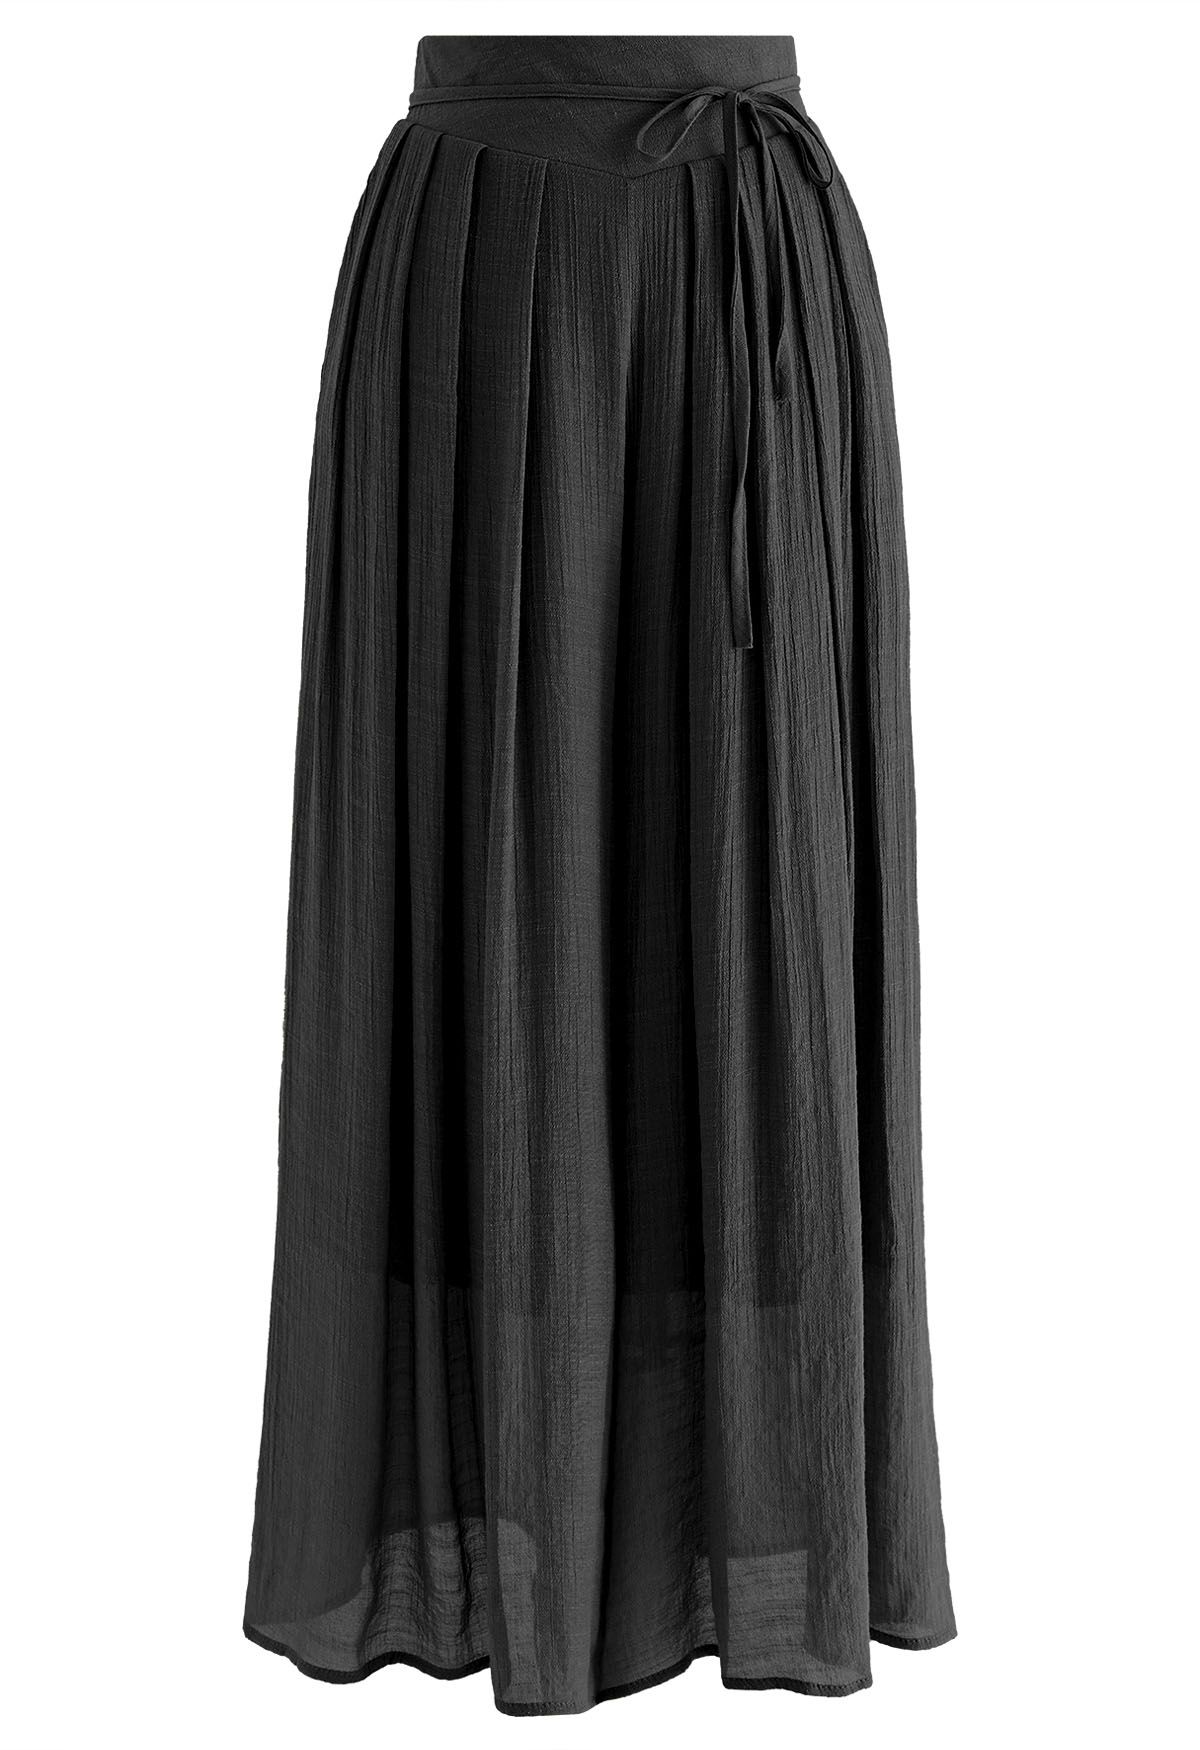 Tie Waist Pleated Wide-Leg Pants in Black - Retro, Indie and Unique Fashion